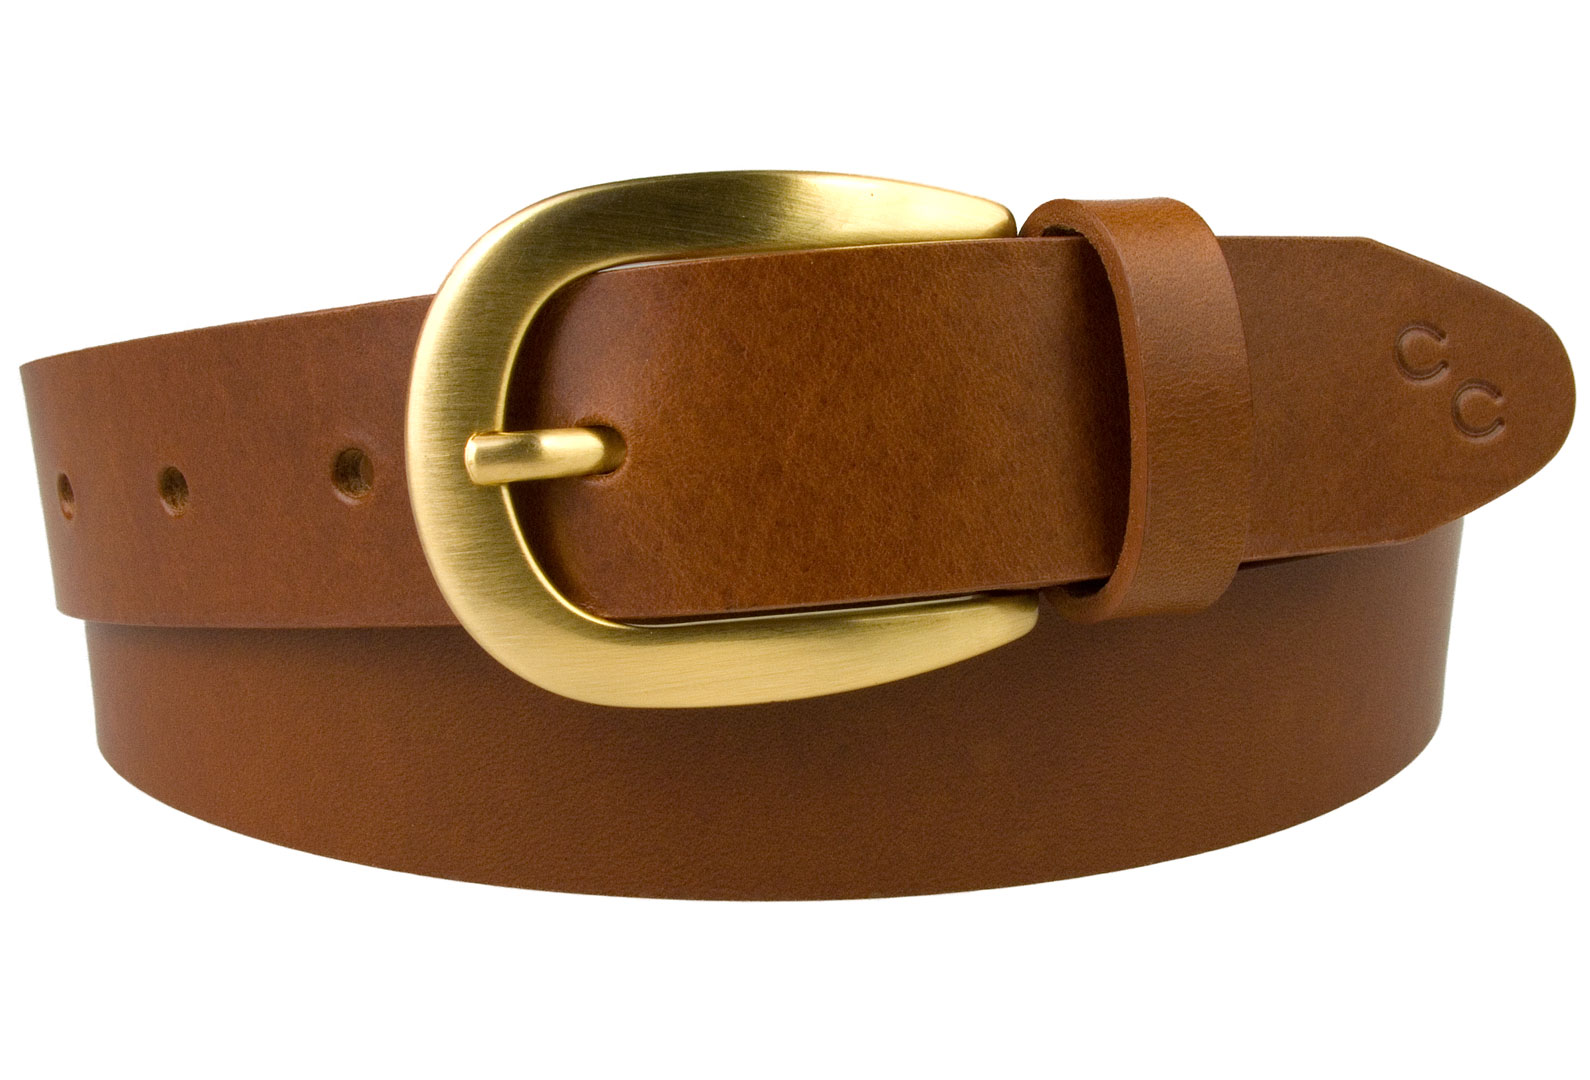 Small Medium & Large 30 x Wholesale Joblot Womens Belts Tan Brown with Buckle 